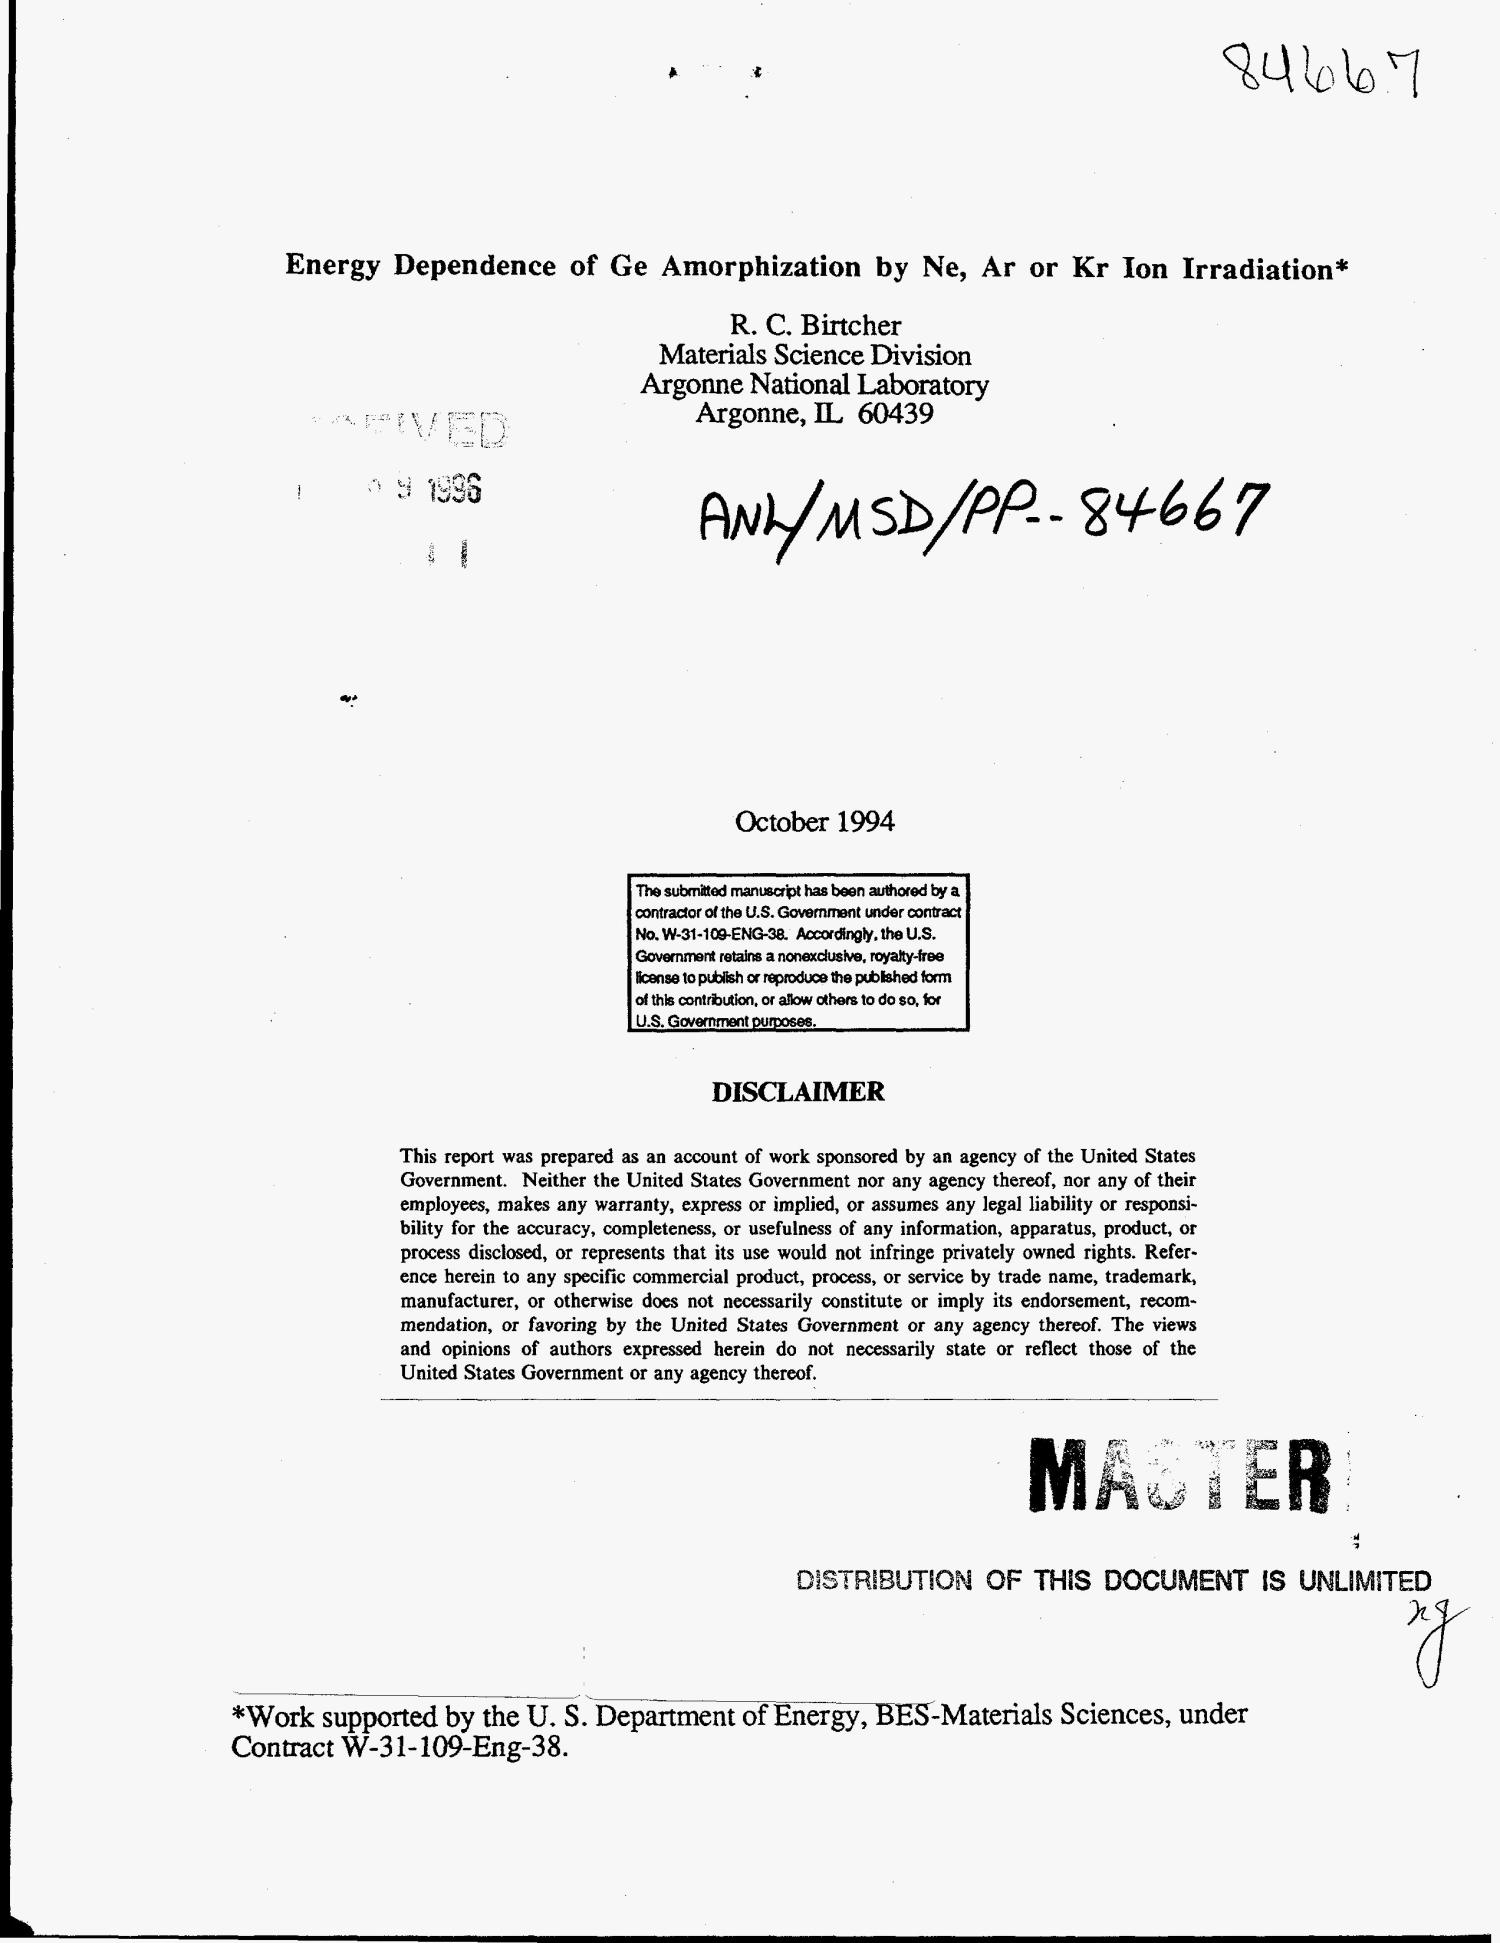 Energy dependence of Ge amorphization by Ne, Ar or Kr ion irradiation
                                                
                                                    [Sequence #]: 1 of 20
                                                